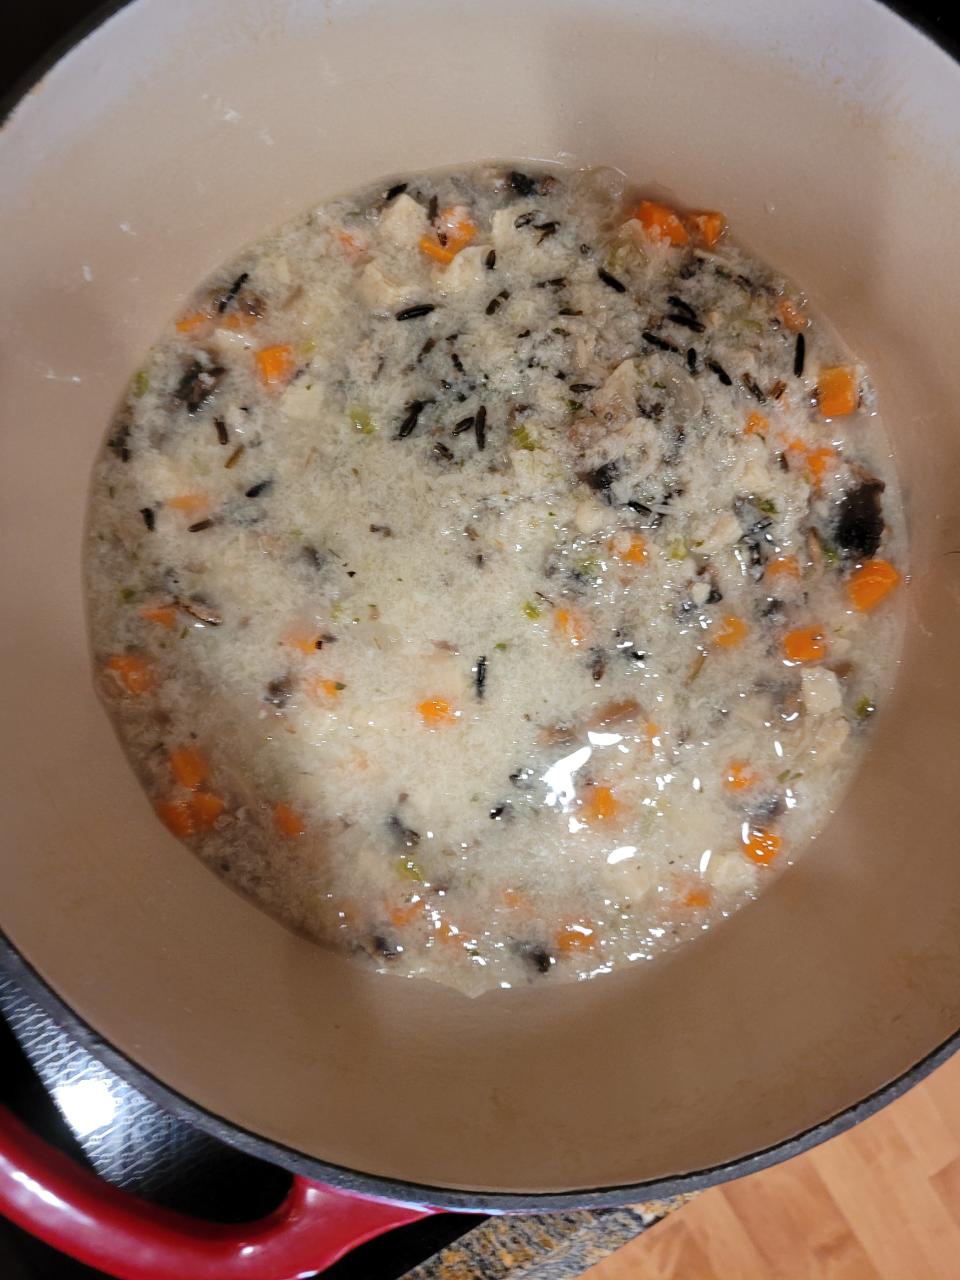 Kwik Trip sells bags of cold soup that can be reheated, such as this chicken and wild rice soup.